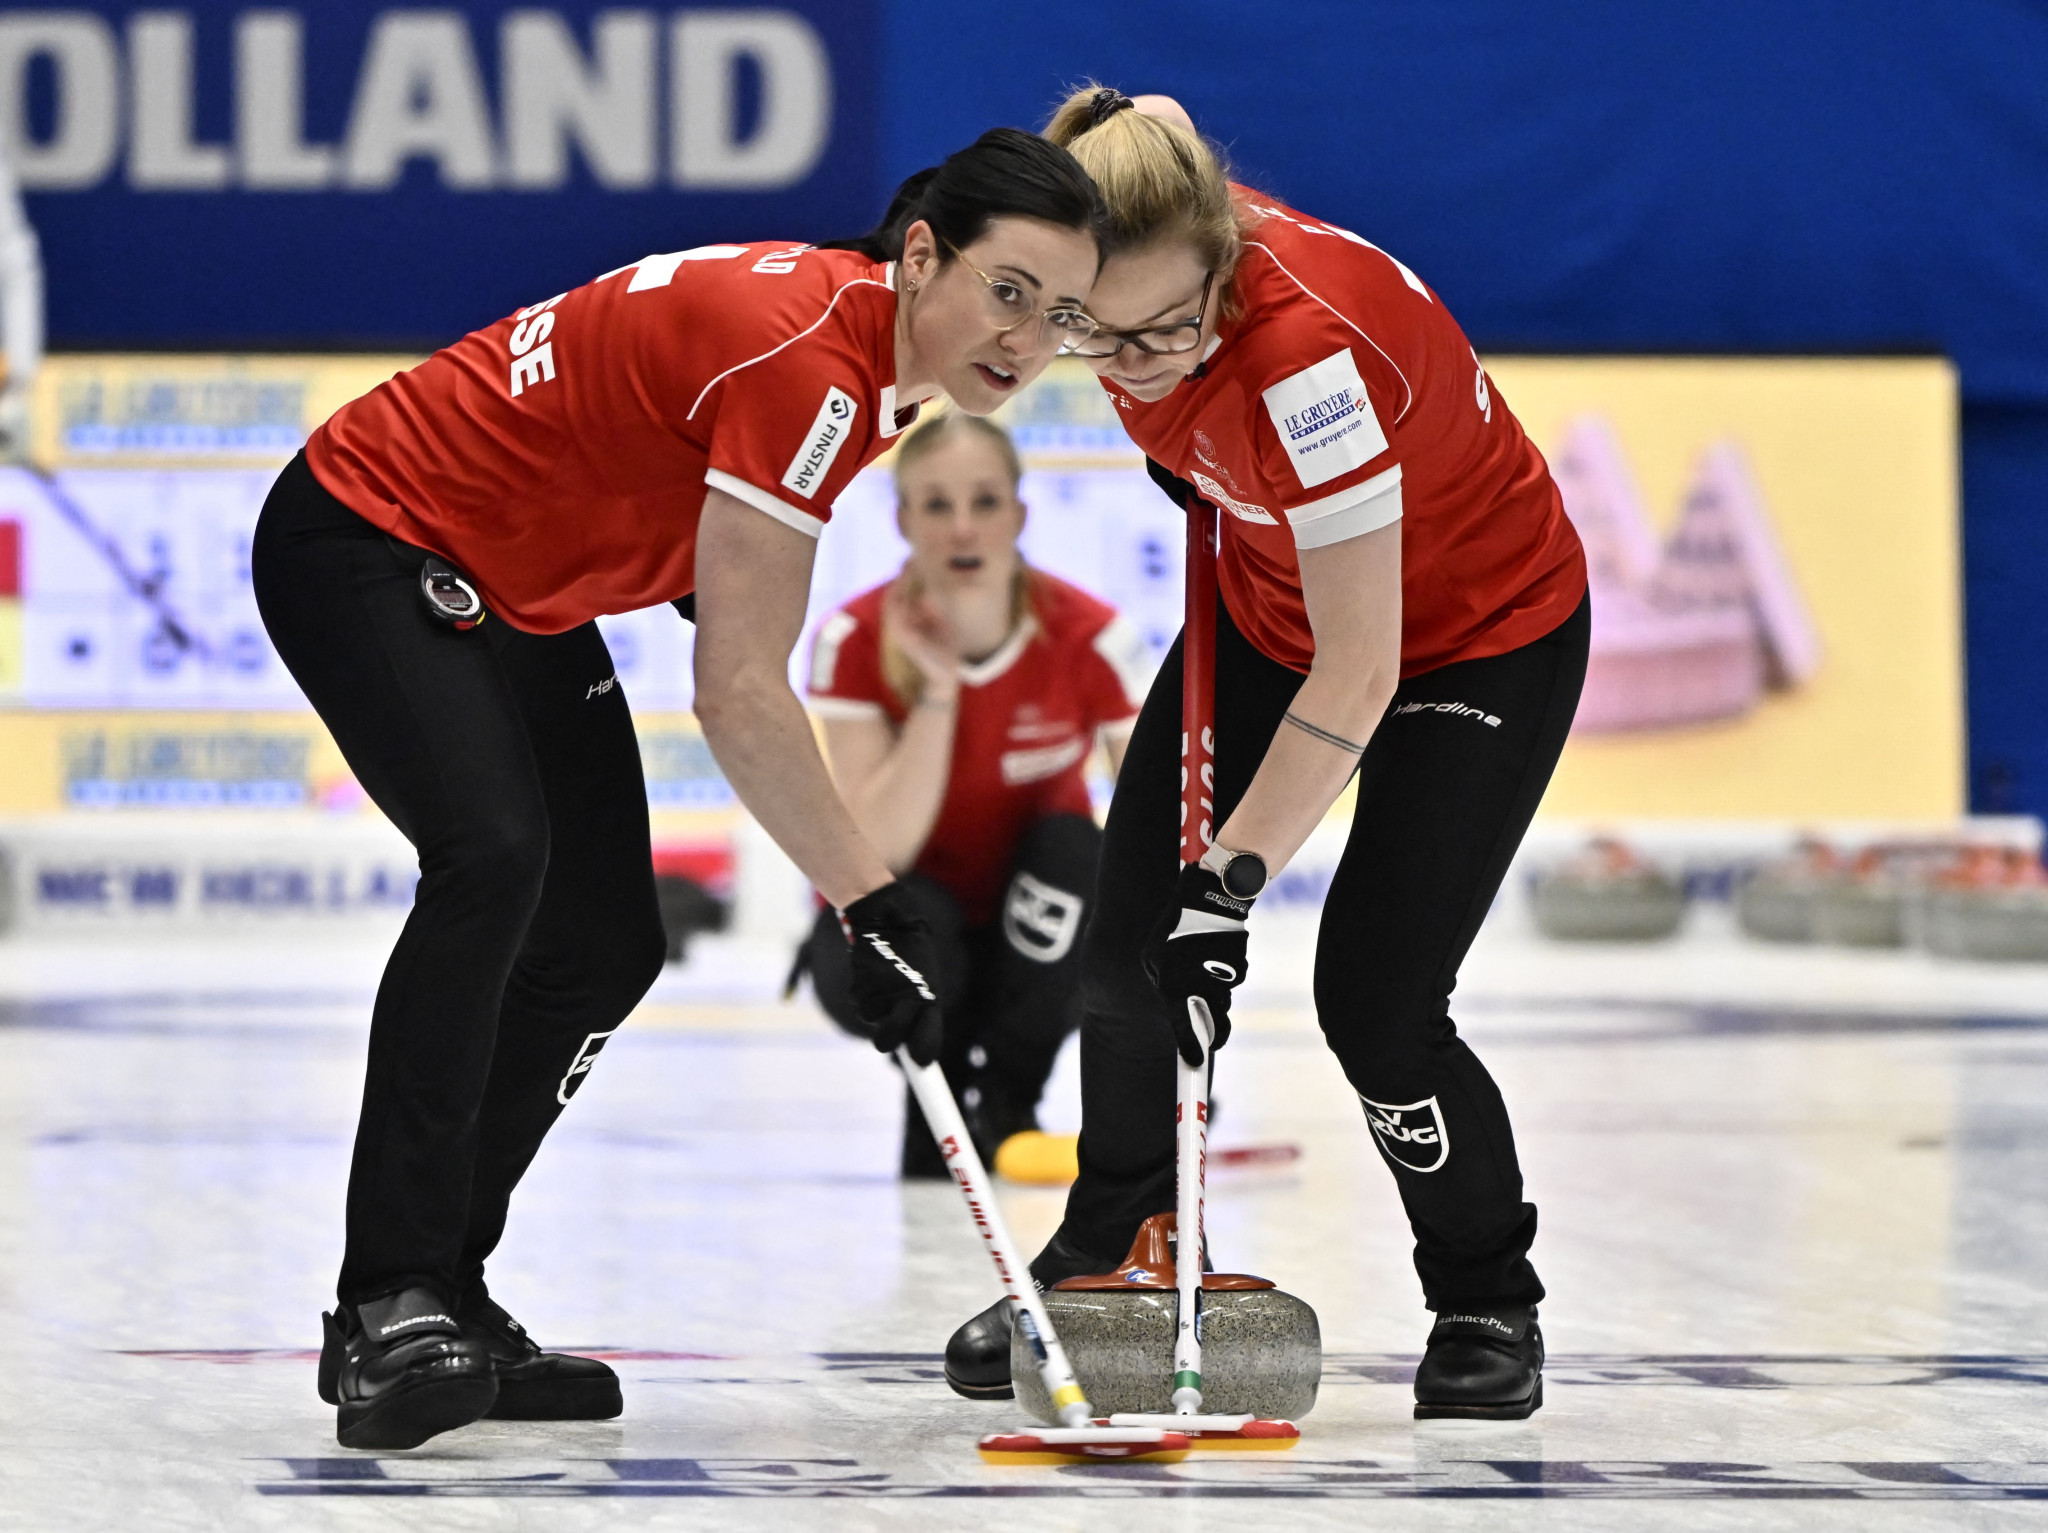 Defending champions Switzerland win both their matches on opening day of World Women’s Curling Championship